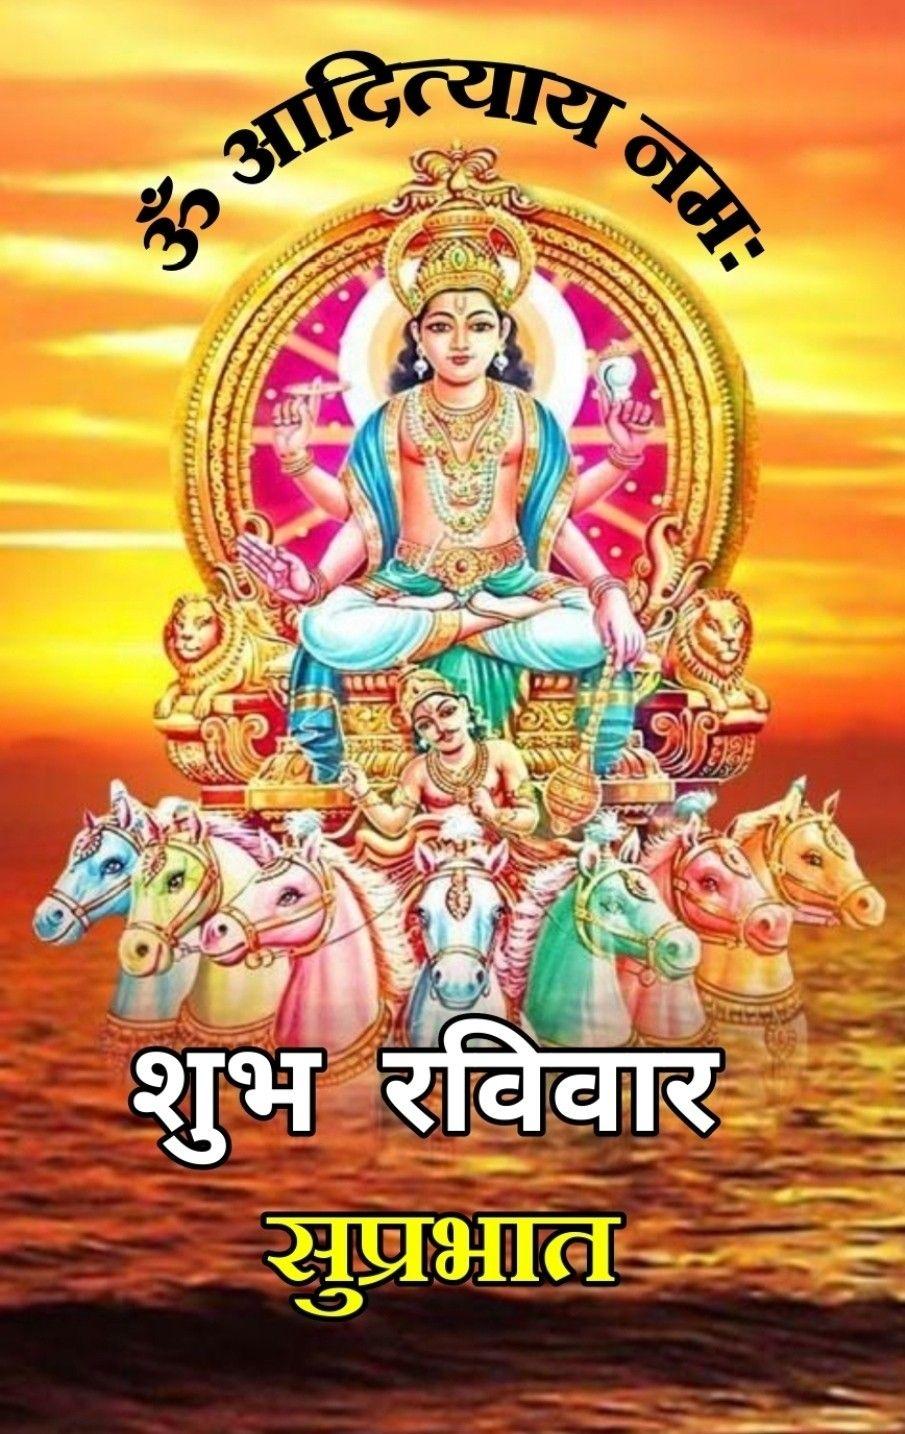 30 Surya Dev सरय दव   Pictures and Graphics for different festivals